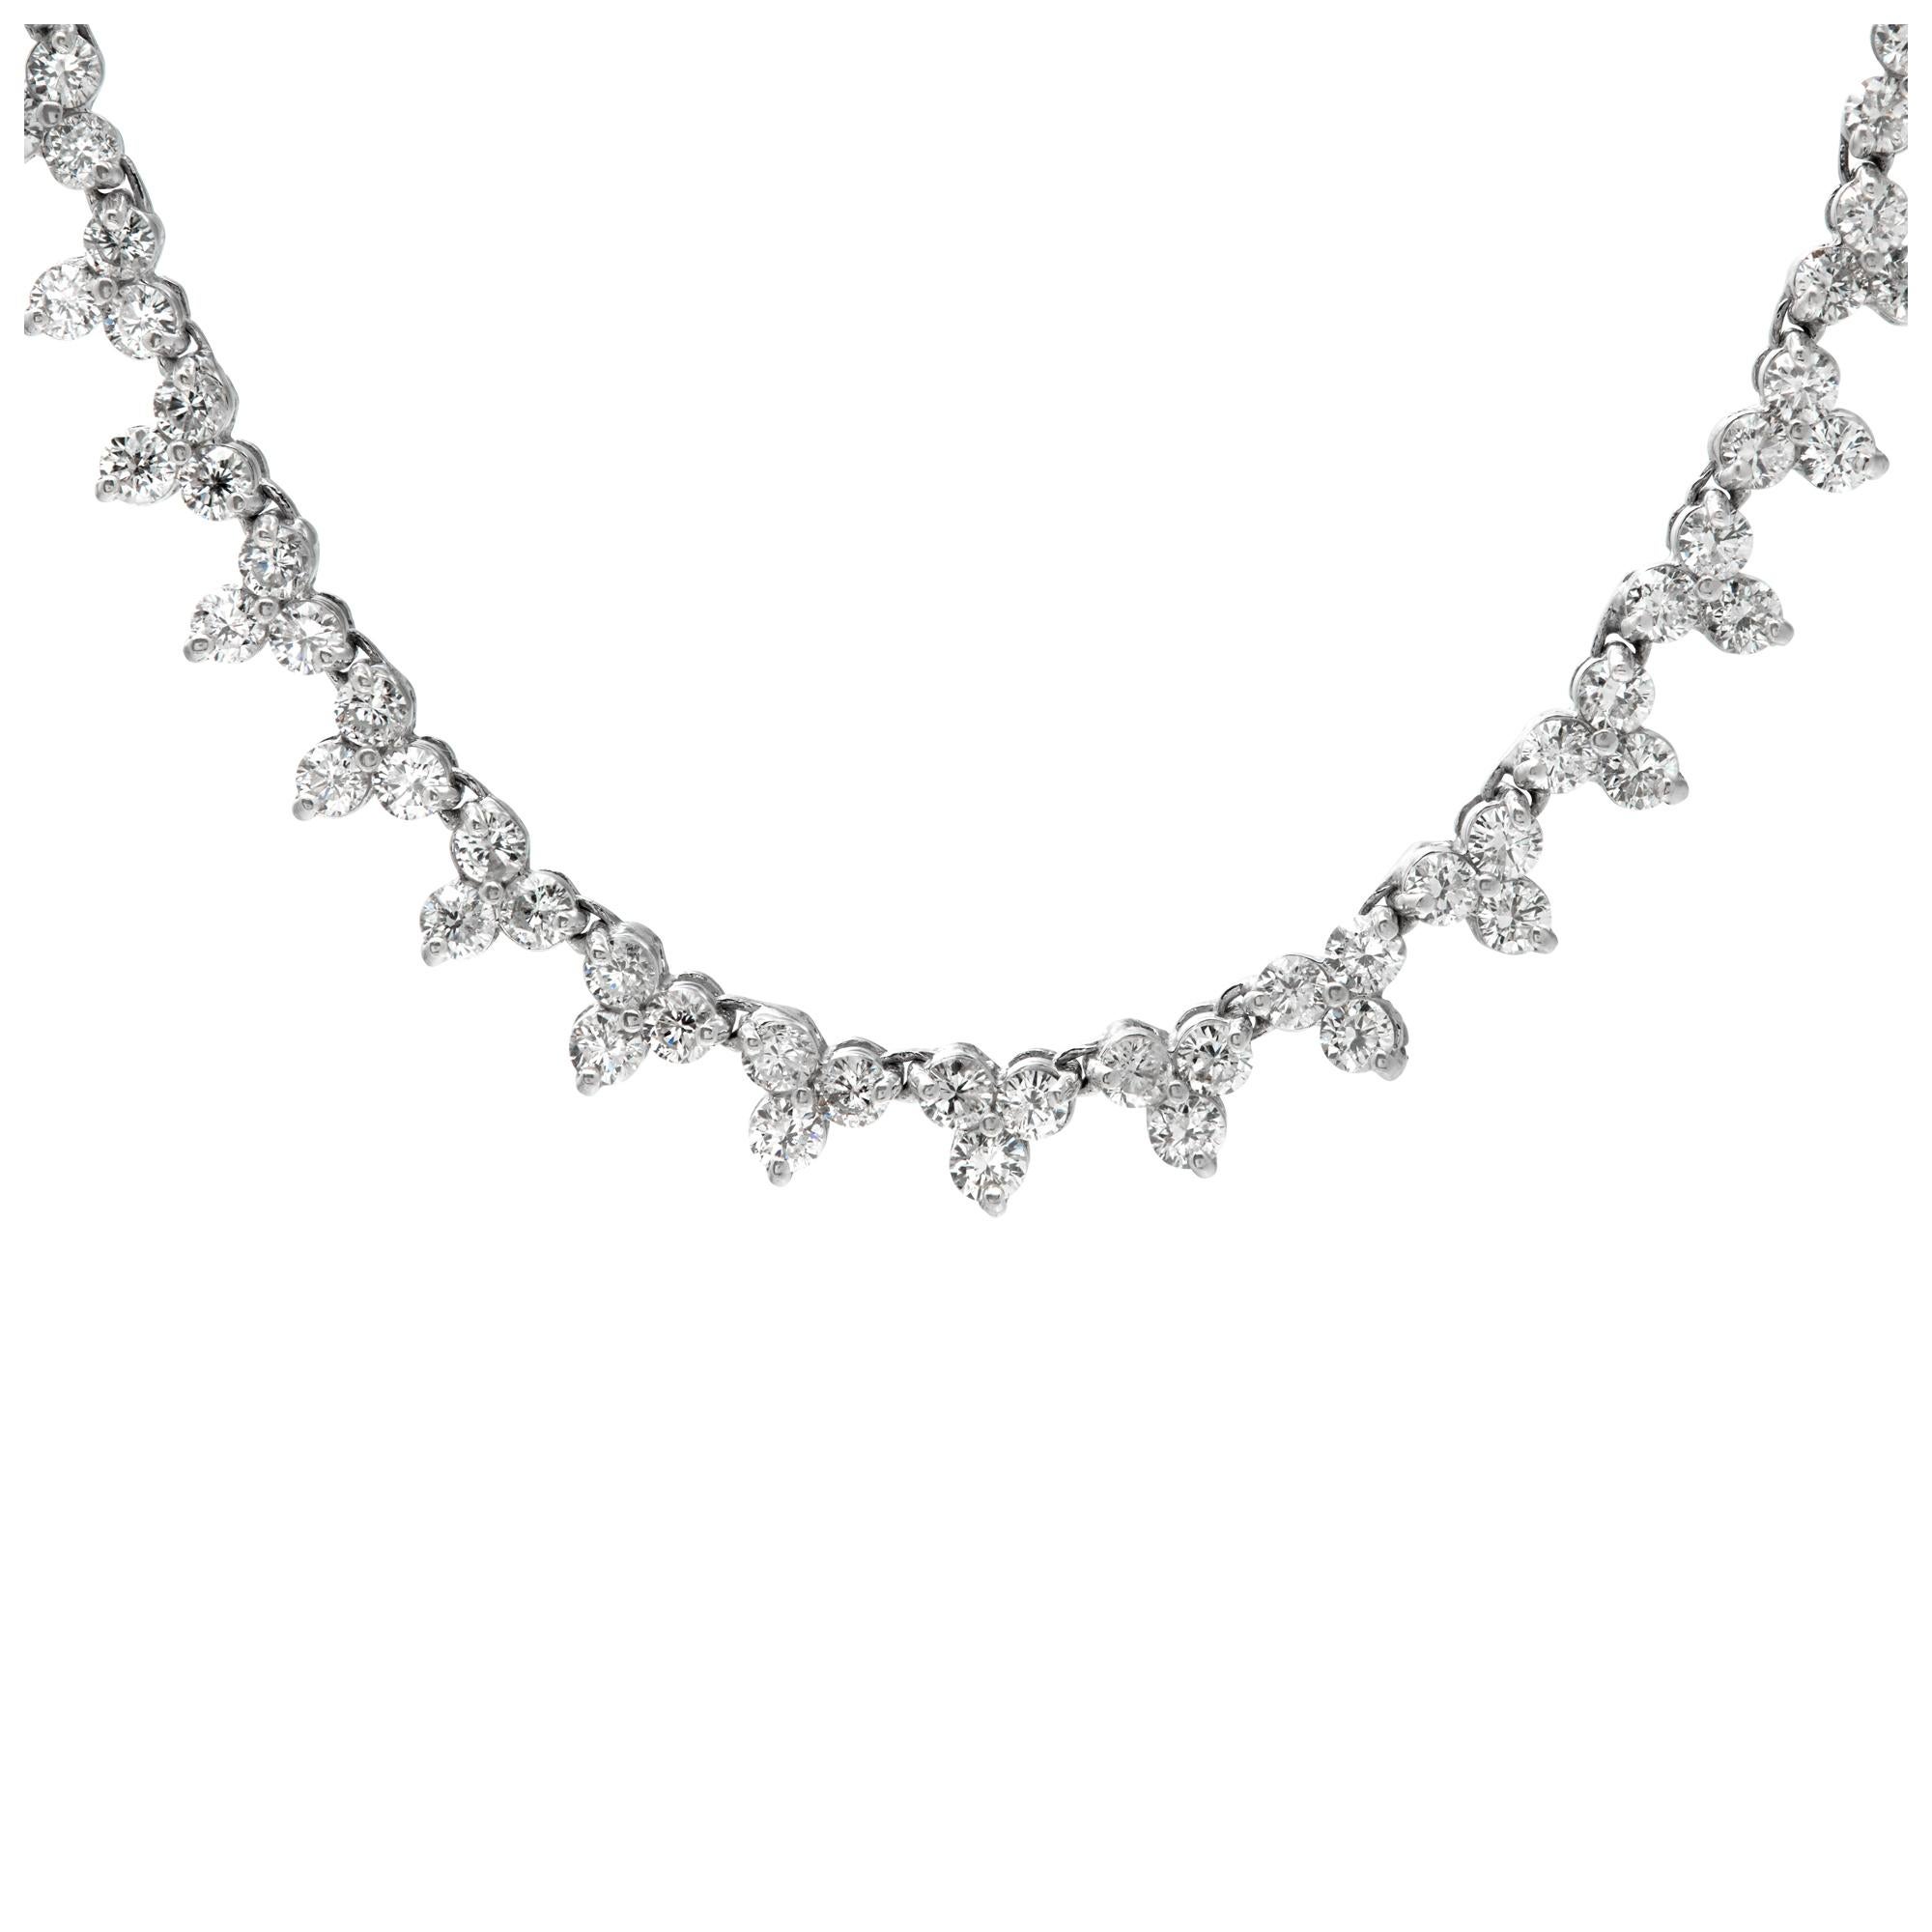 Diamond necklace in 14k white gold with 2.53 carats in round brilliant cut diamonds (G-H Color, VS Clarity). Length 17 inches.
